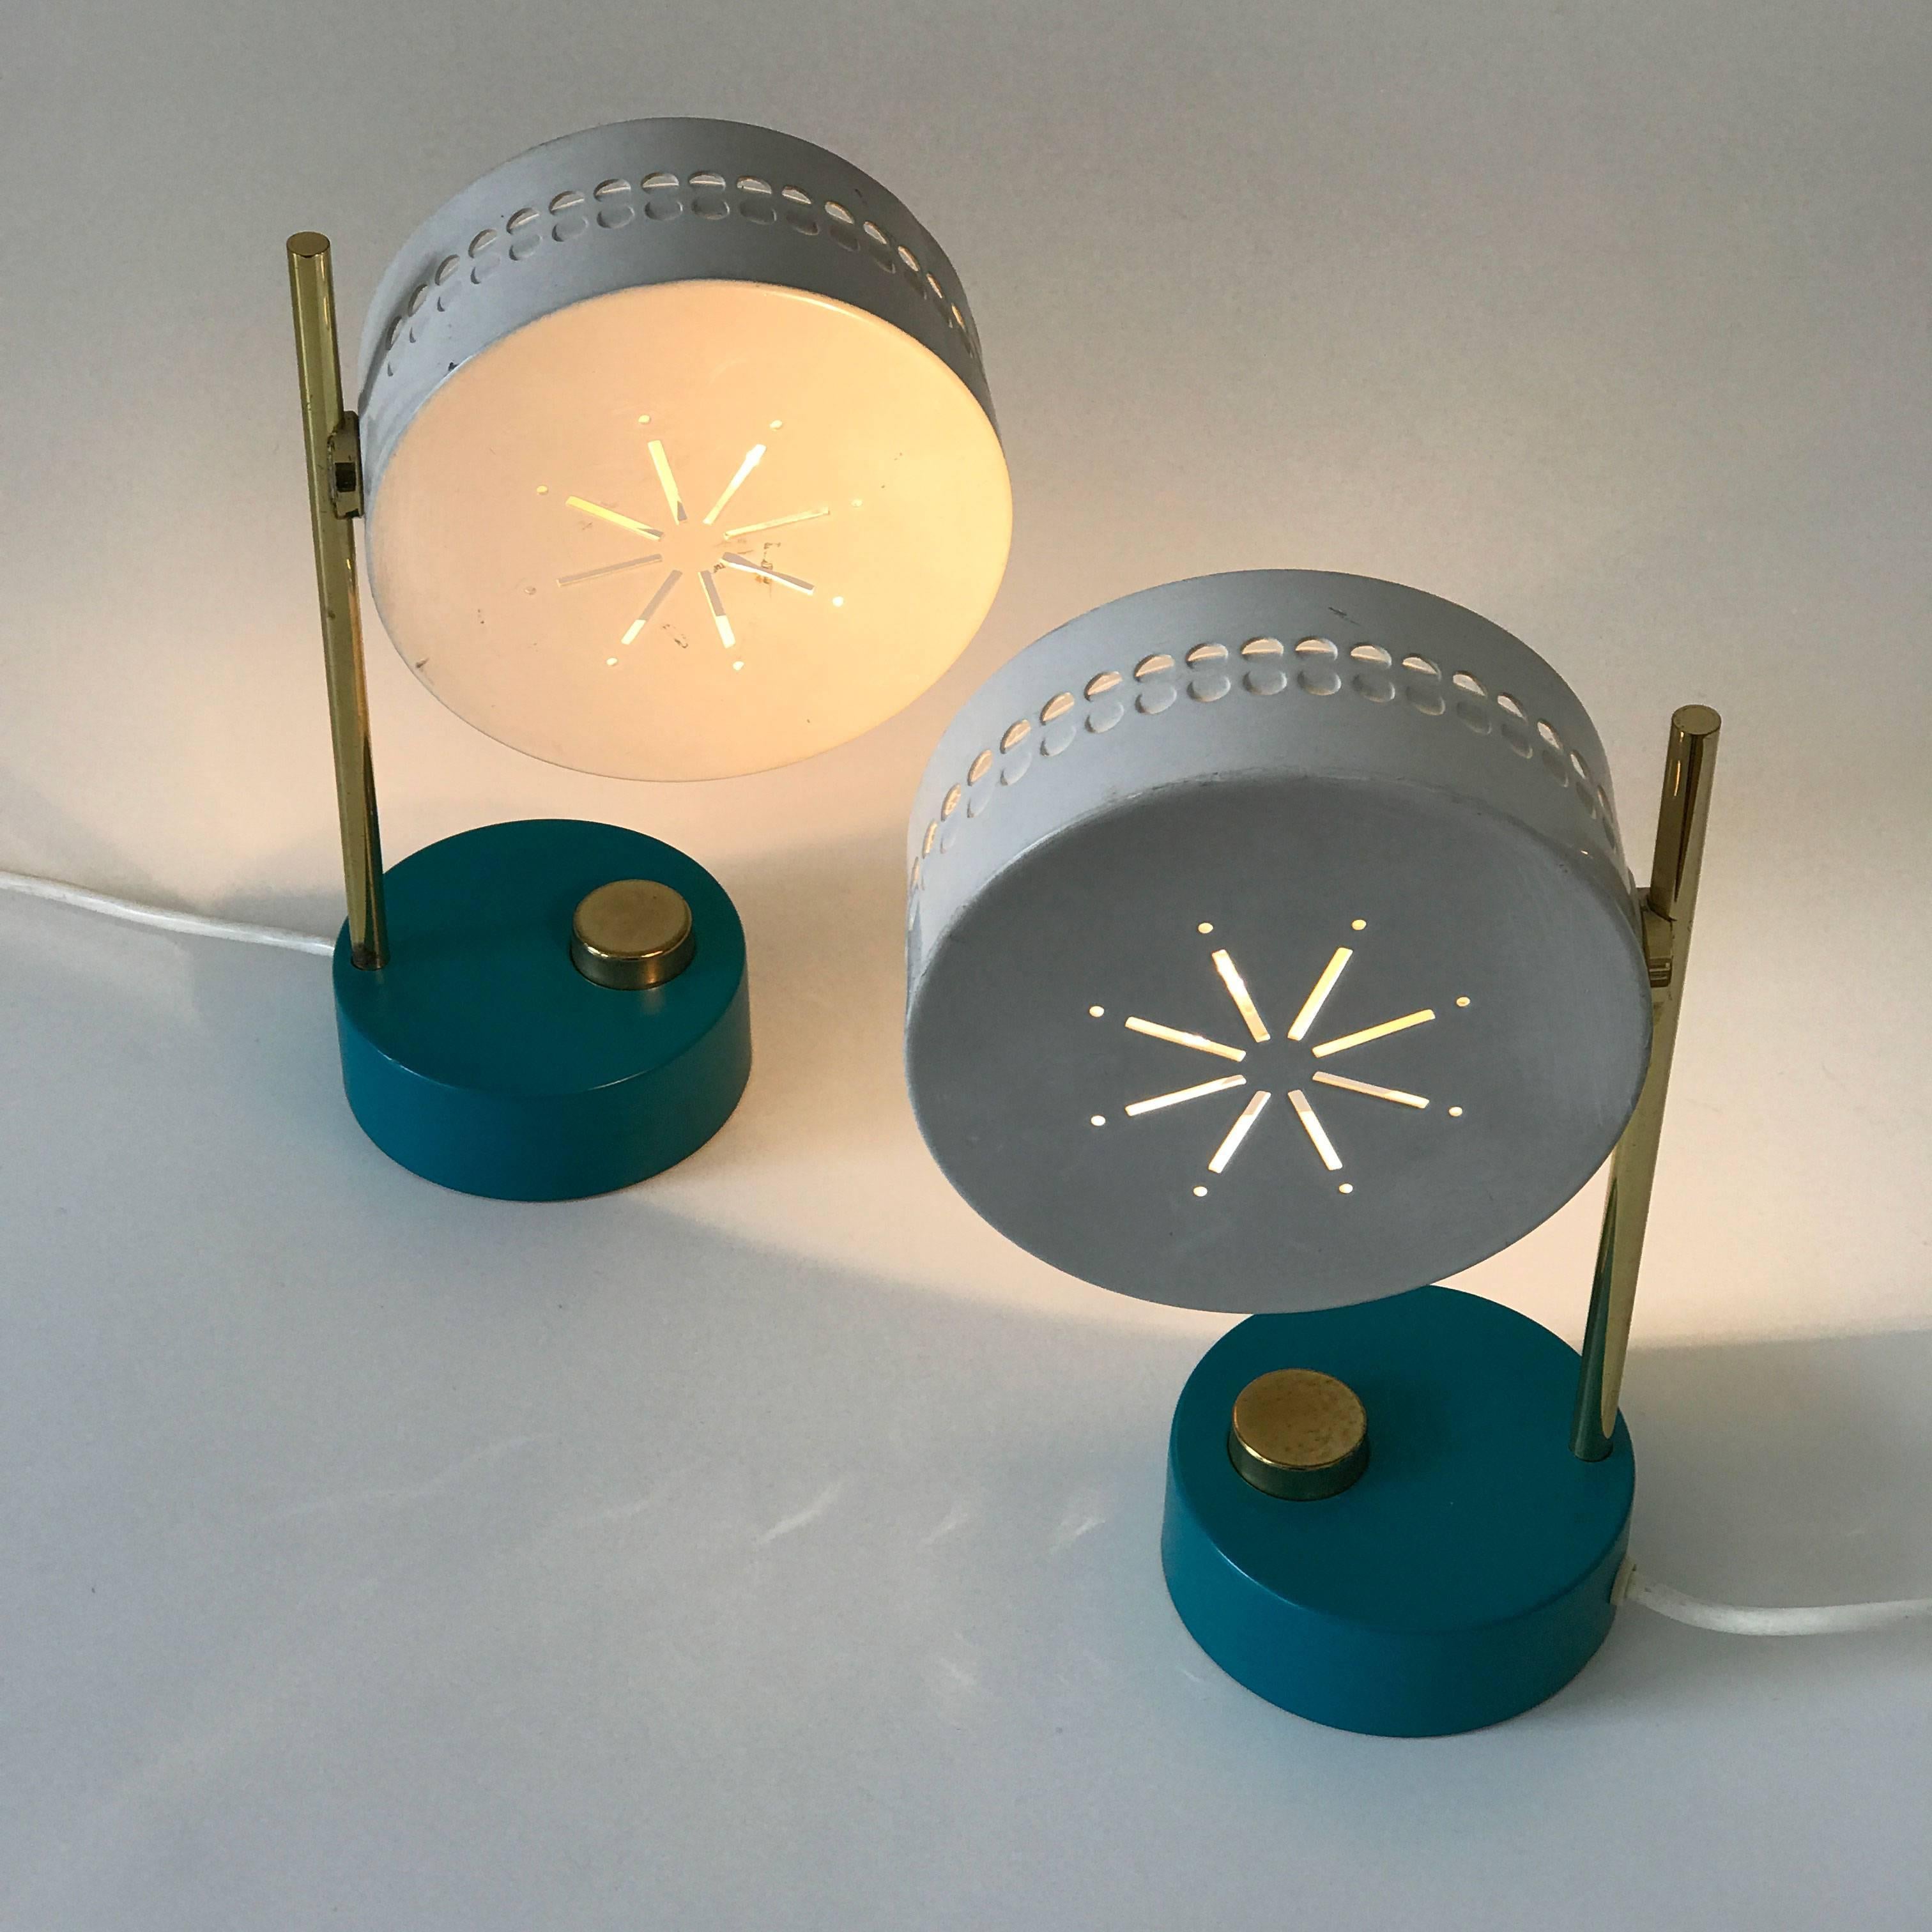 Two bedside table lamps. Designed by Mathieu Matégot attributed. Manufactured in 1950s. Each lamp needs one E14 screw fit bulb. Delivery without bulb. With rotating lamp shades and oversized brass switches on the base.